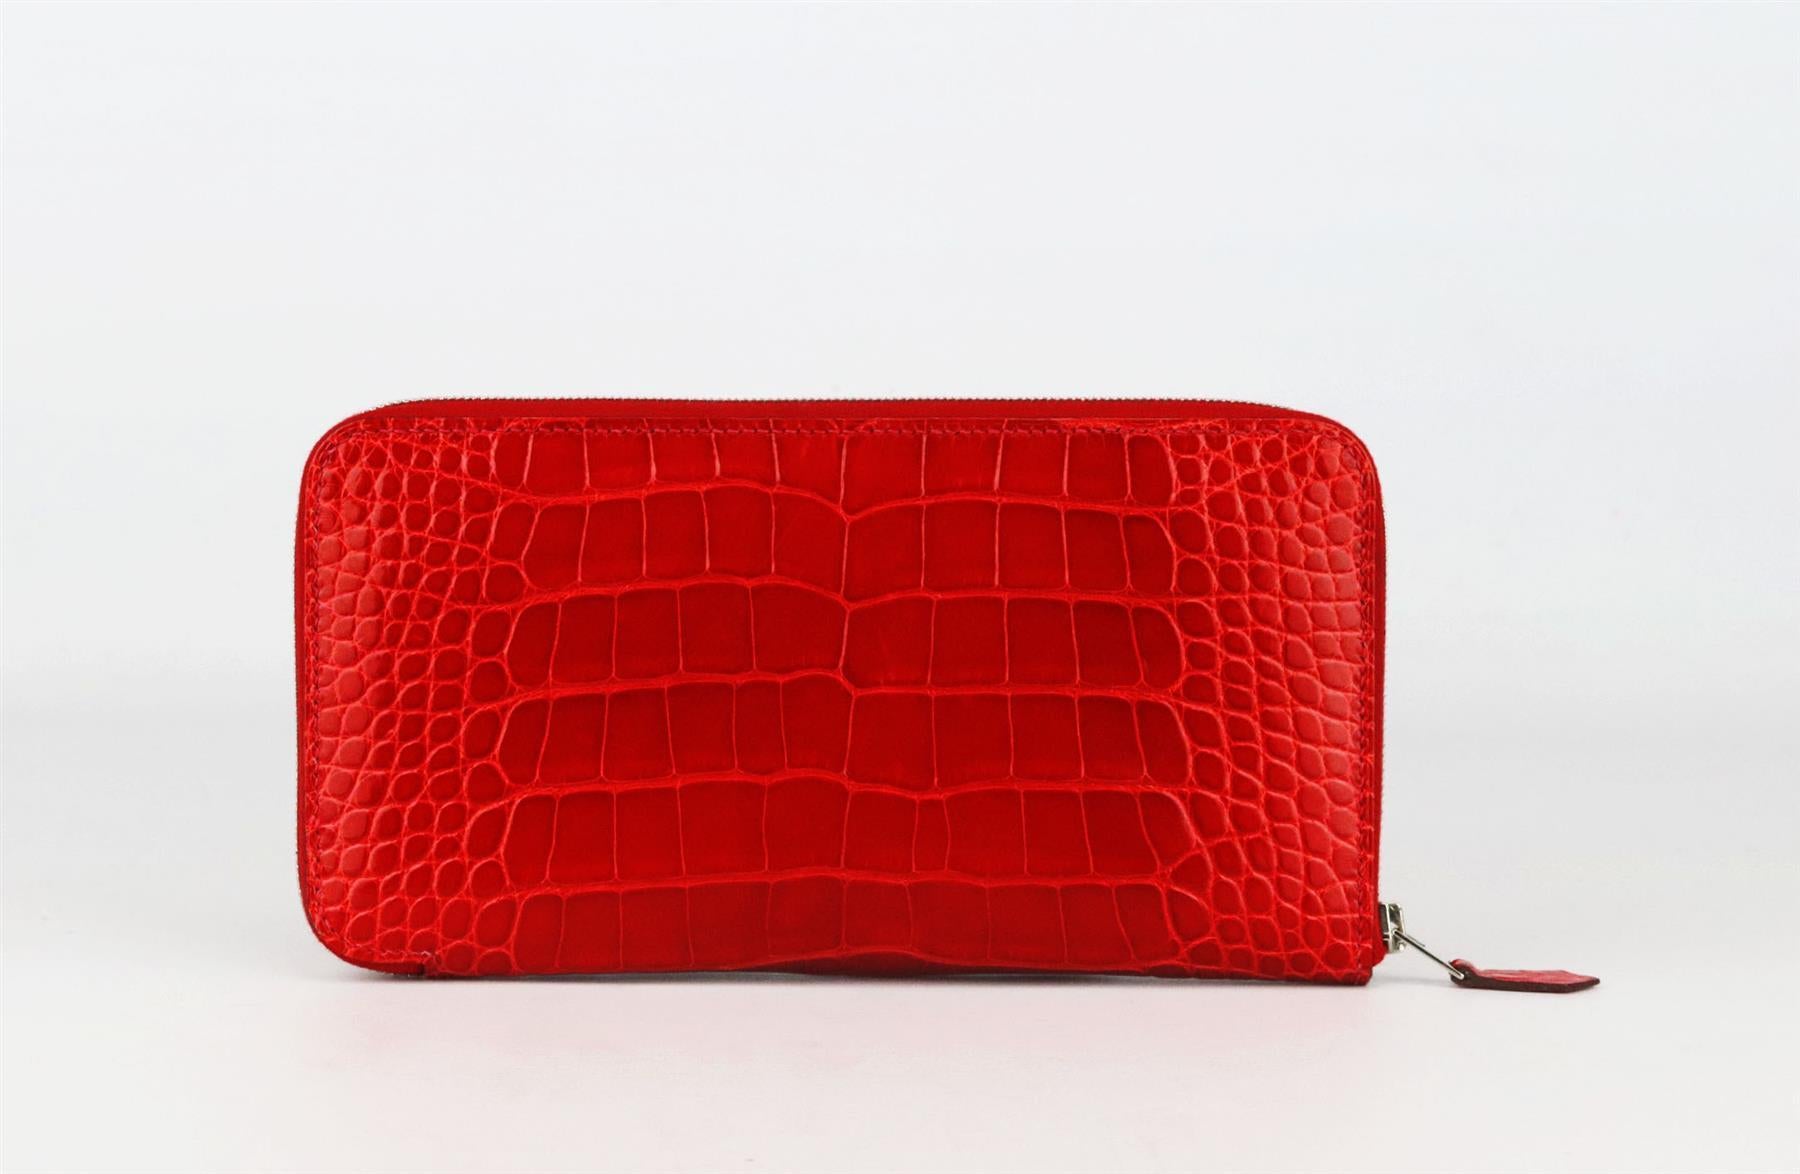 Made in France, this beautiful 2013 Hermès ‘Azap’ wallet has been made from shiny Alligator Mississippiensis exterior in red and matching leather interior, it is decorated with palladium H hardware on the zip and finished with 12 card slots, 2 bill